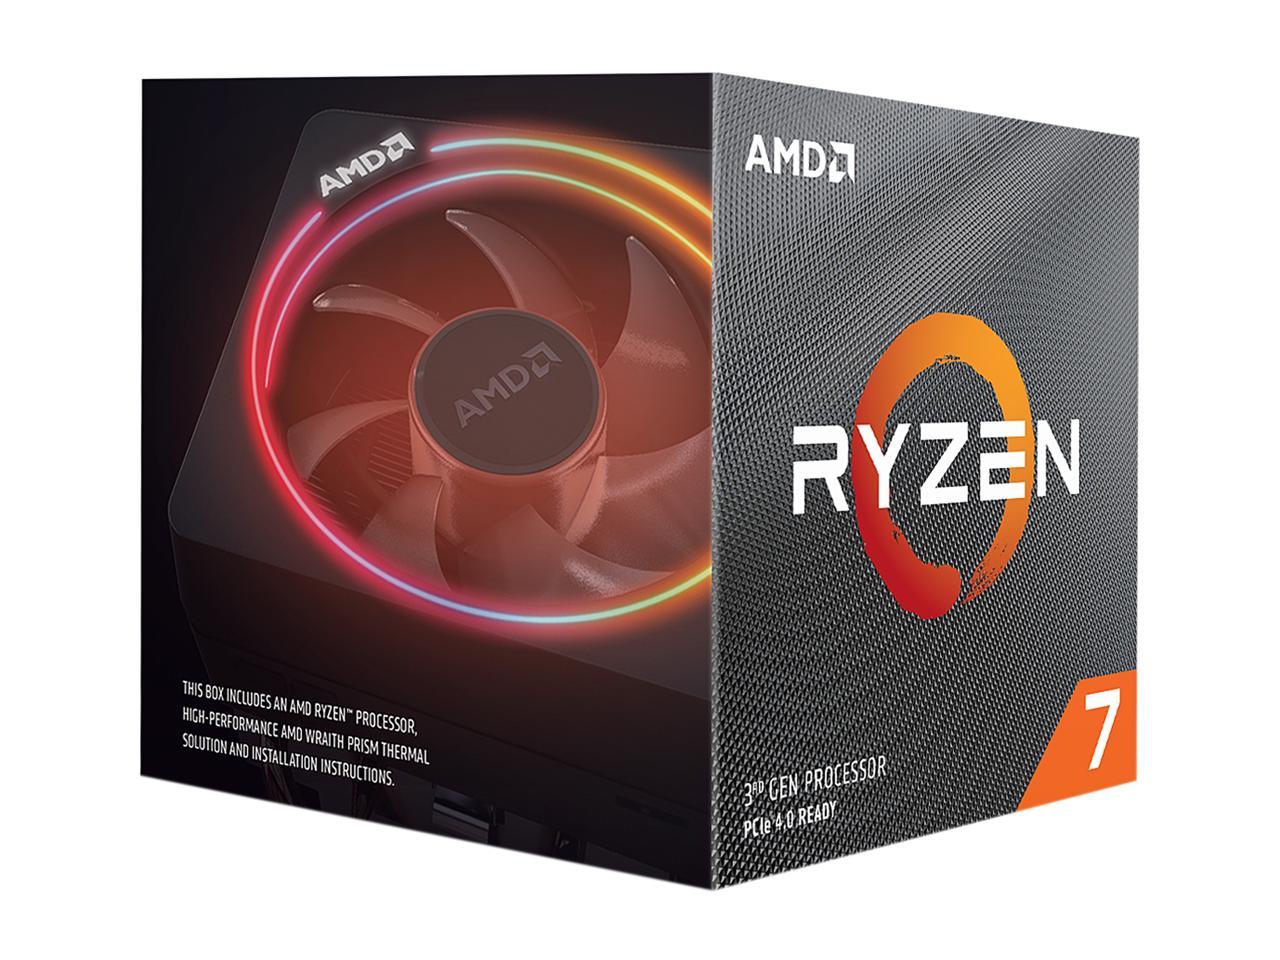 Micro Center AMD Ryzen 7 3700X Matisse Desktop Processor 8-Core Up to 4.4GHz Unlocked with Wraith Prism LED Cooler Bundle with ASUS TUF Gaming B450-PLUS II AMD AM4 Ryzen 5000 ATX Gaming Motherboard 